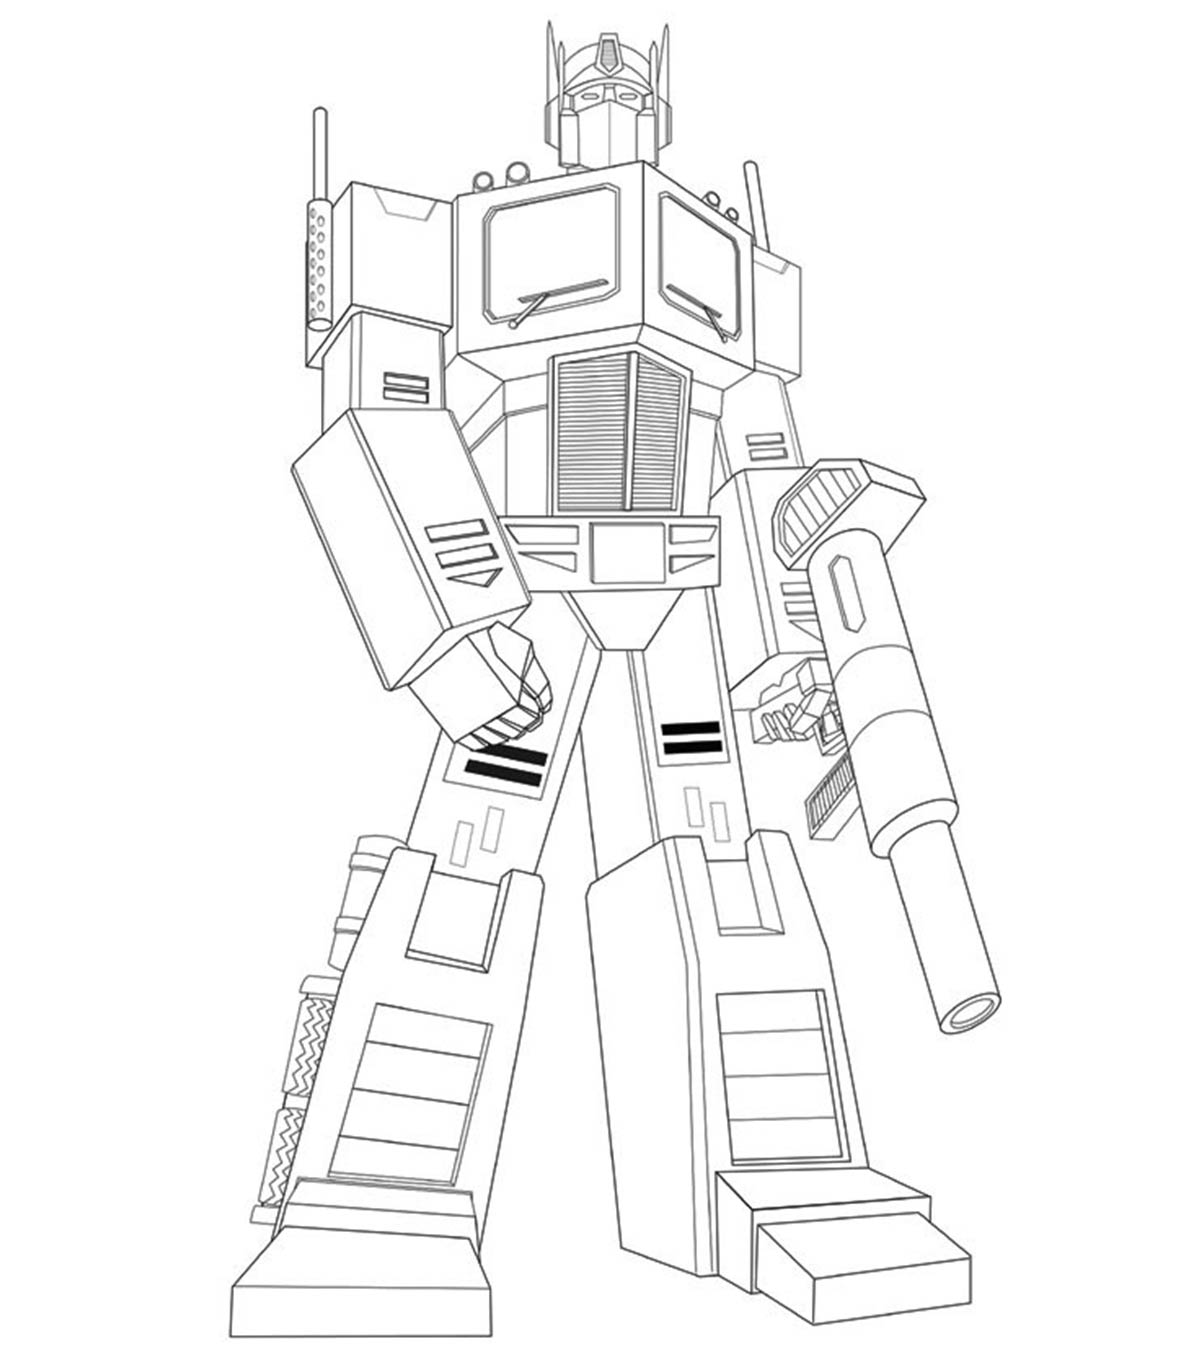 20 Popular Transformers Coloring Pages Your Toddler Will Love